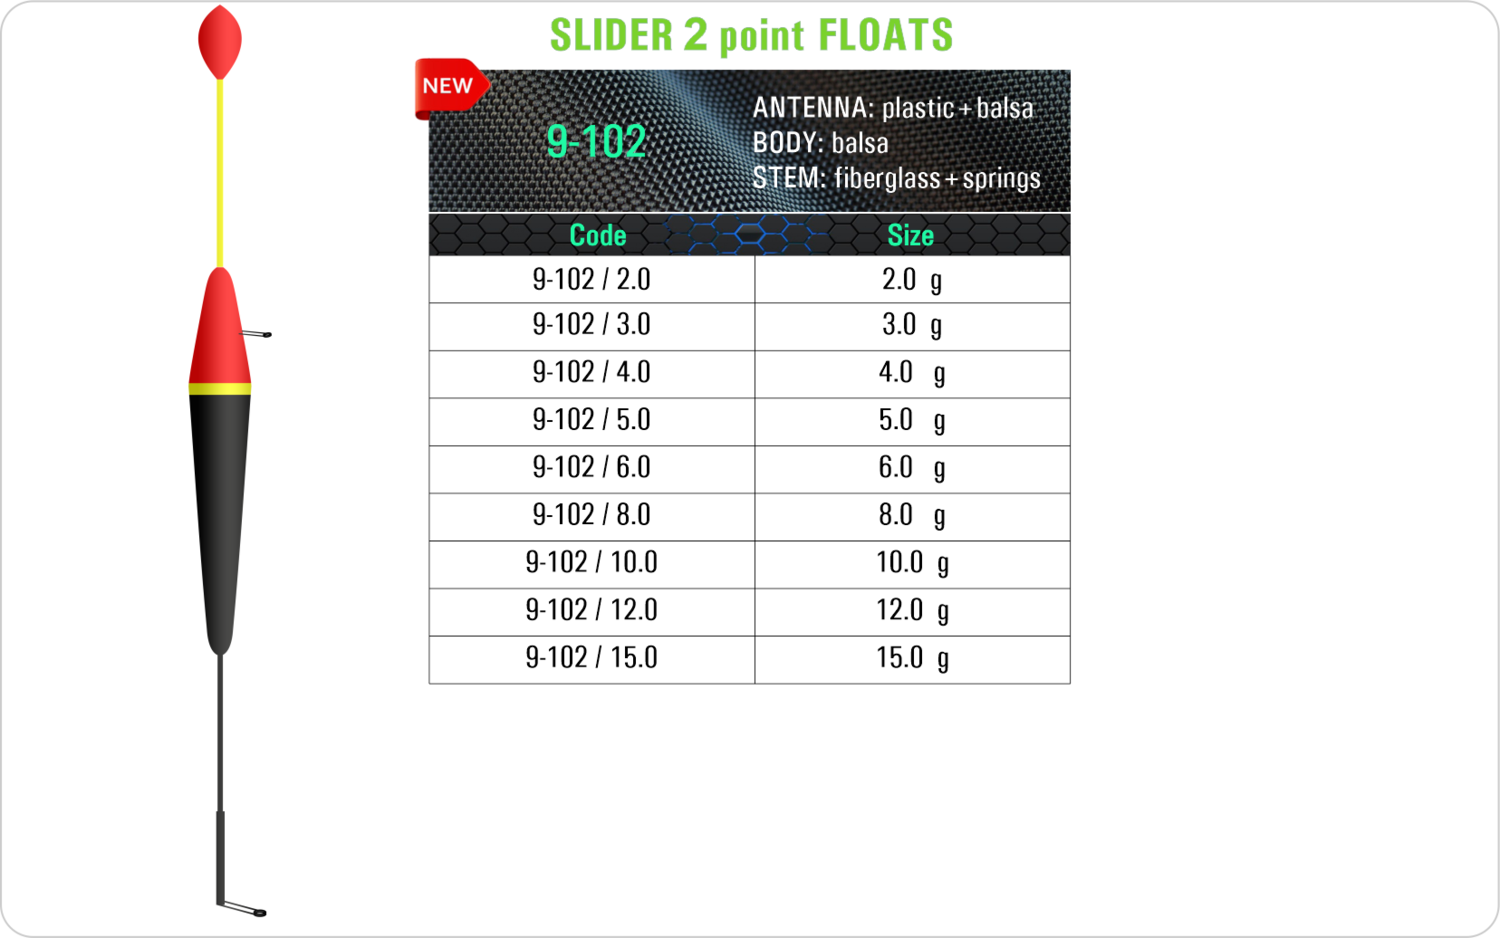 SF 9-102 - Lake and river float model and table containing an additional information about this float with different codes, sizes, types of the body, the stem and the antenna of the float.